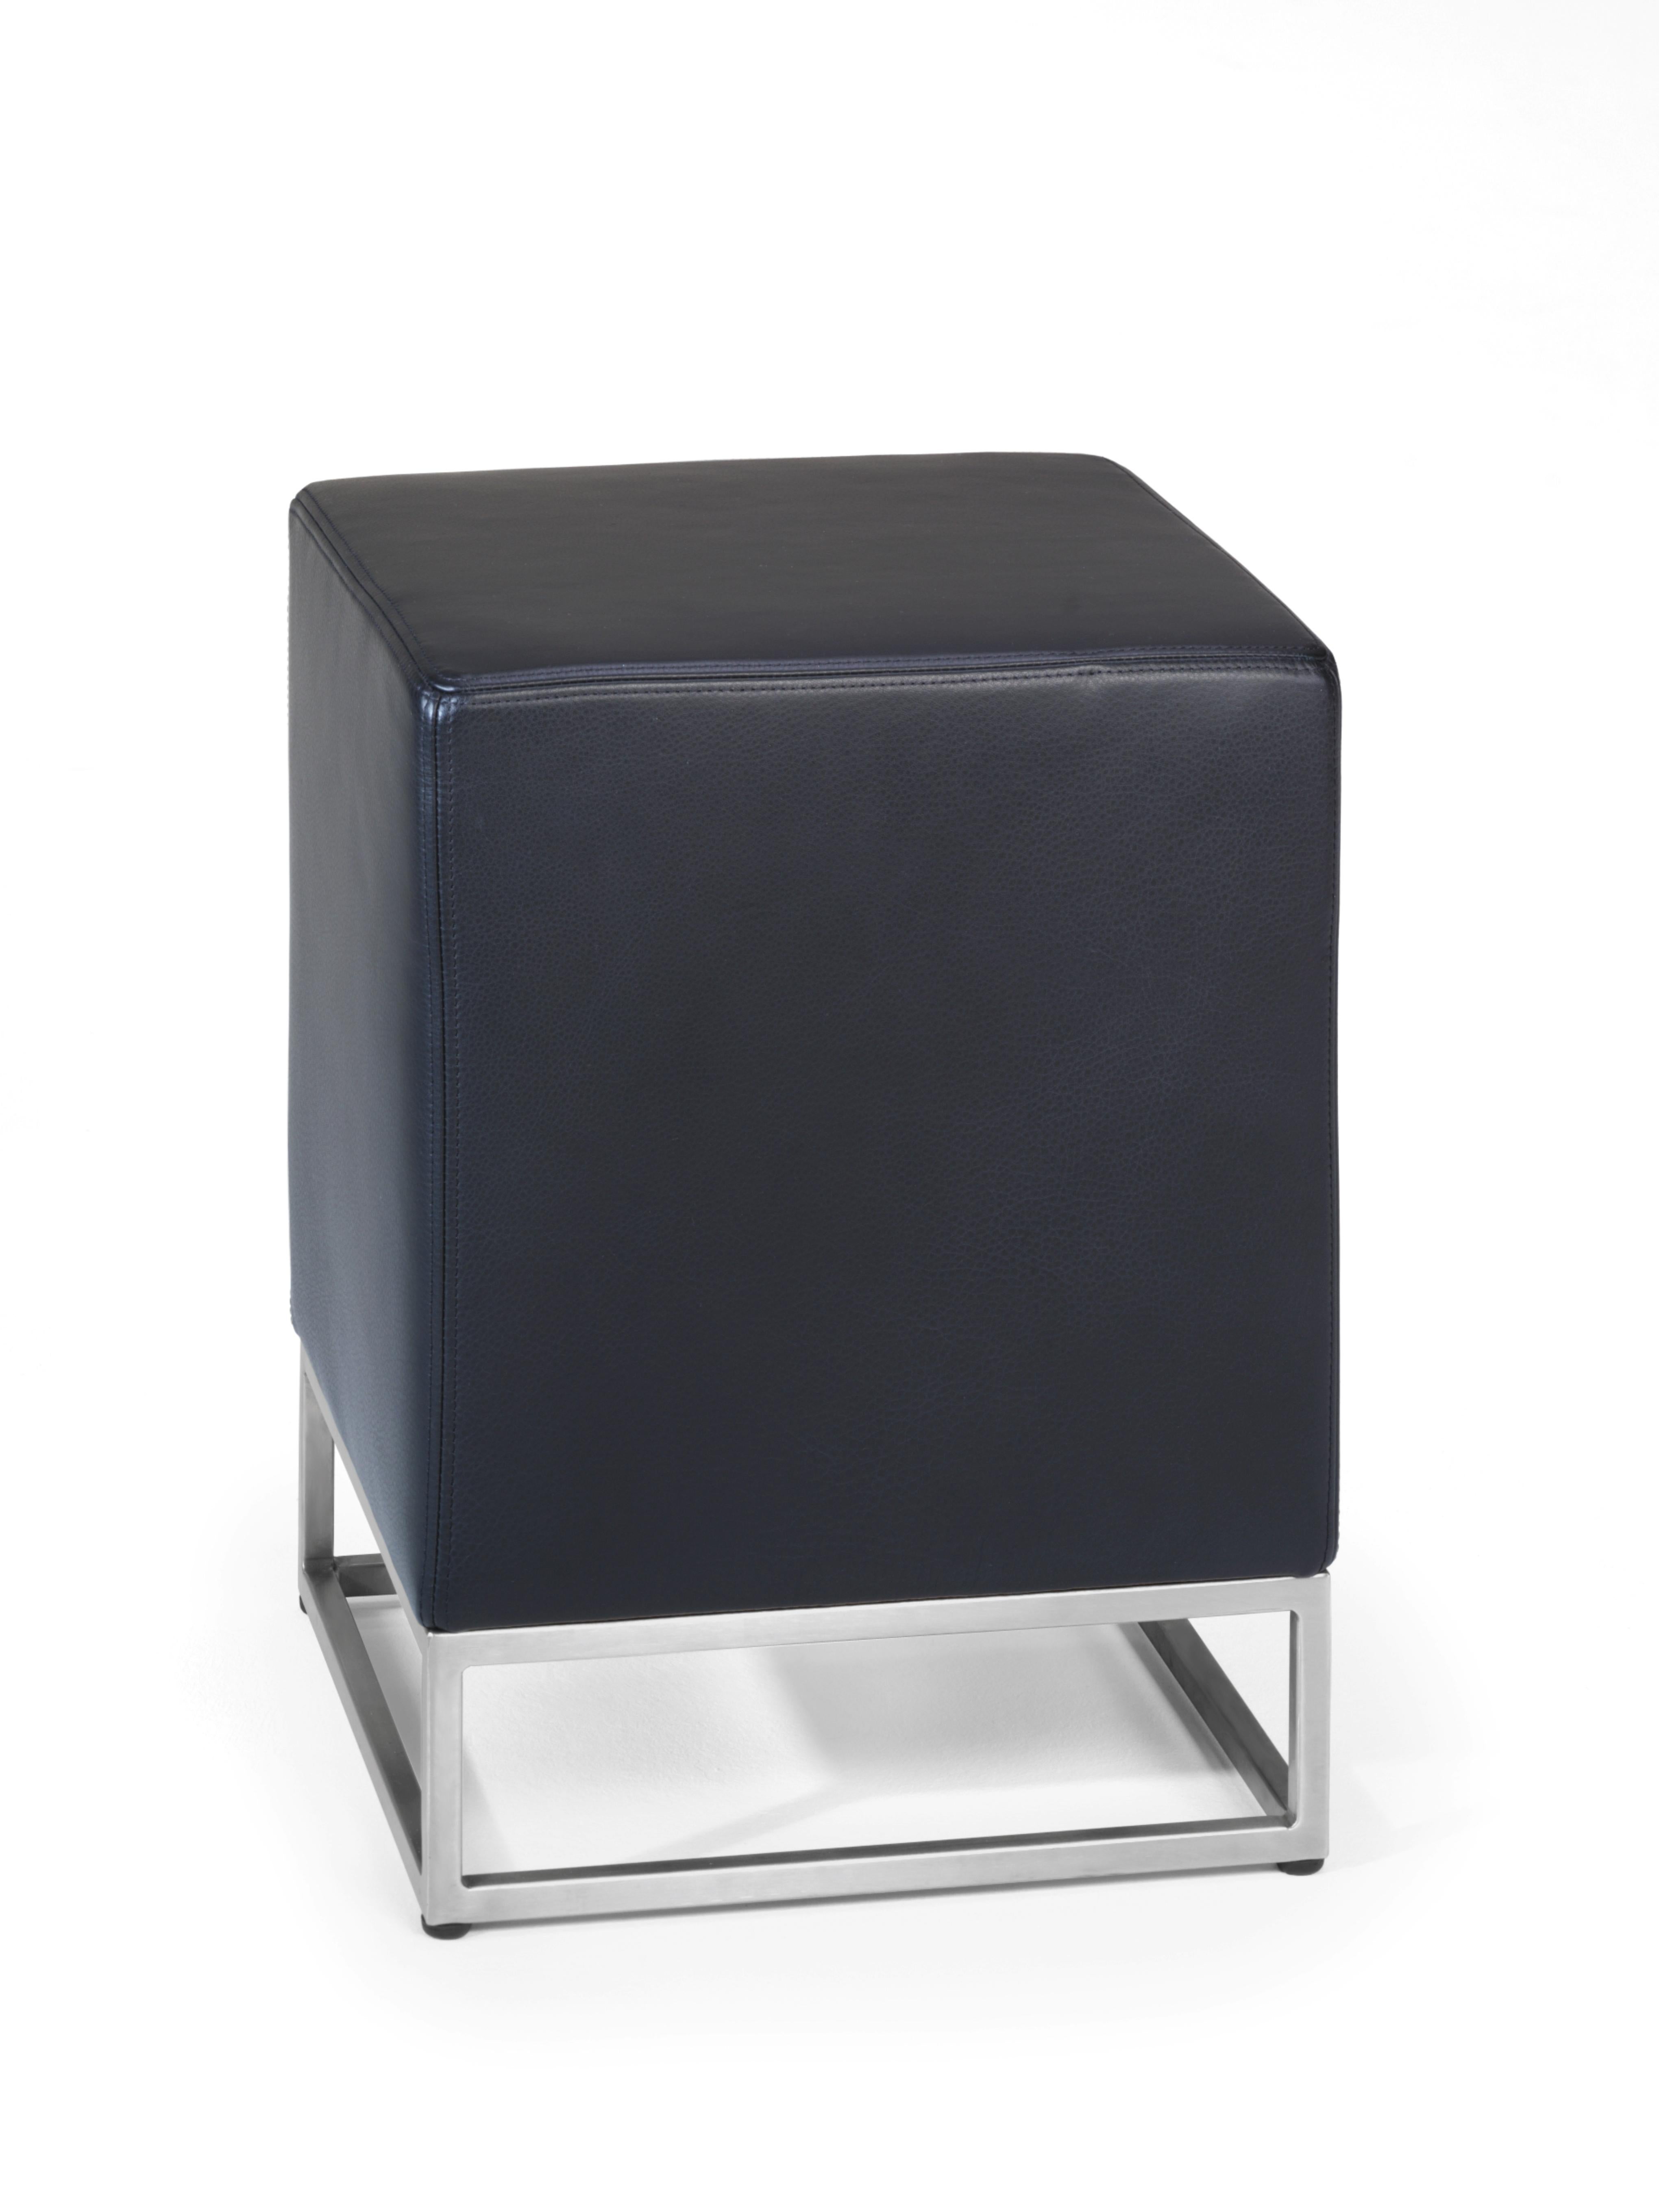 DS-218 stool by De Sede
Dimensions: D 38 x W 38 x H 50 cm
Materials: steel, leather

Prices may change according to the chosen materials and size. 

Plays a decisive role in moulding the character of a room. A focus on clear-cut structures,